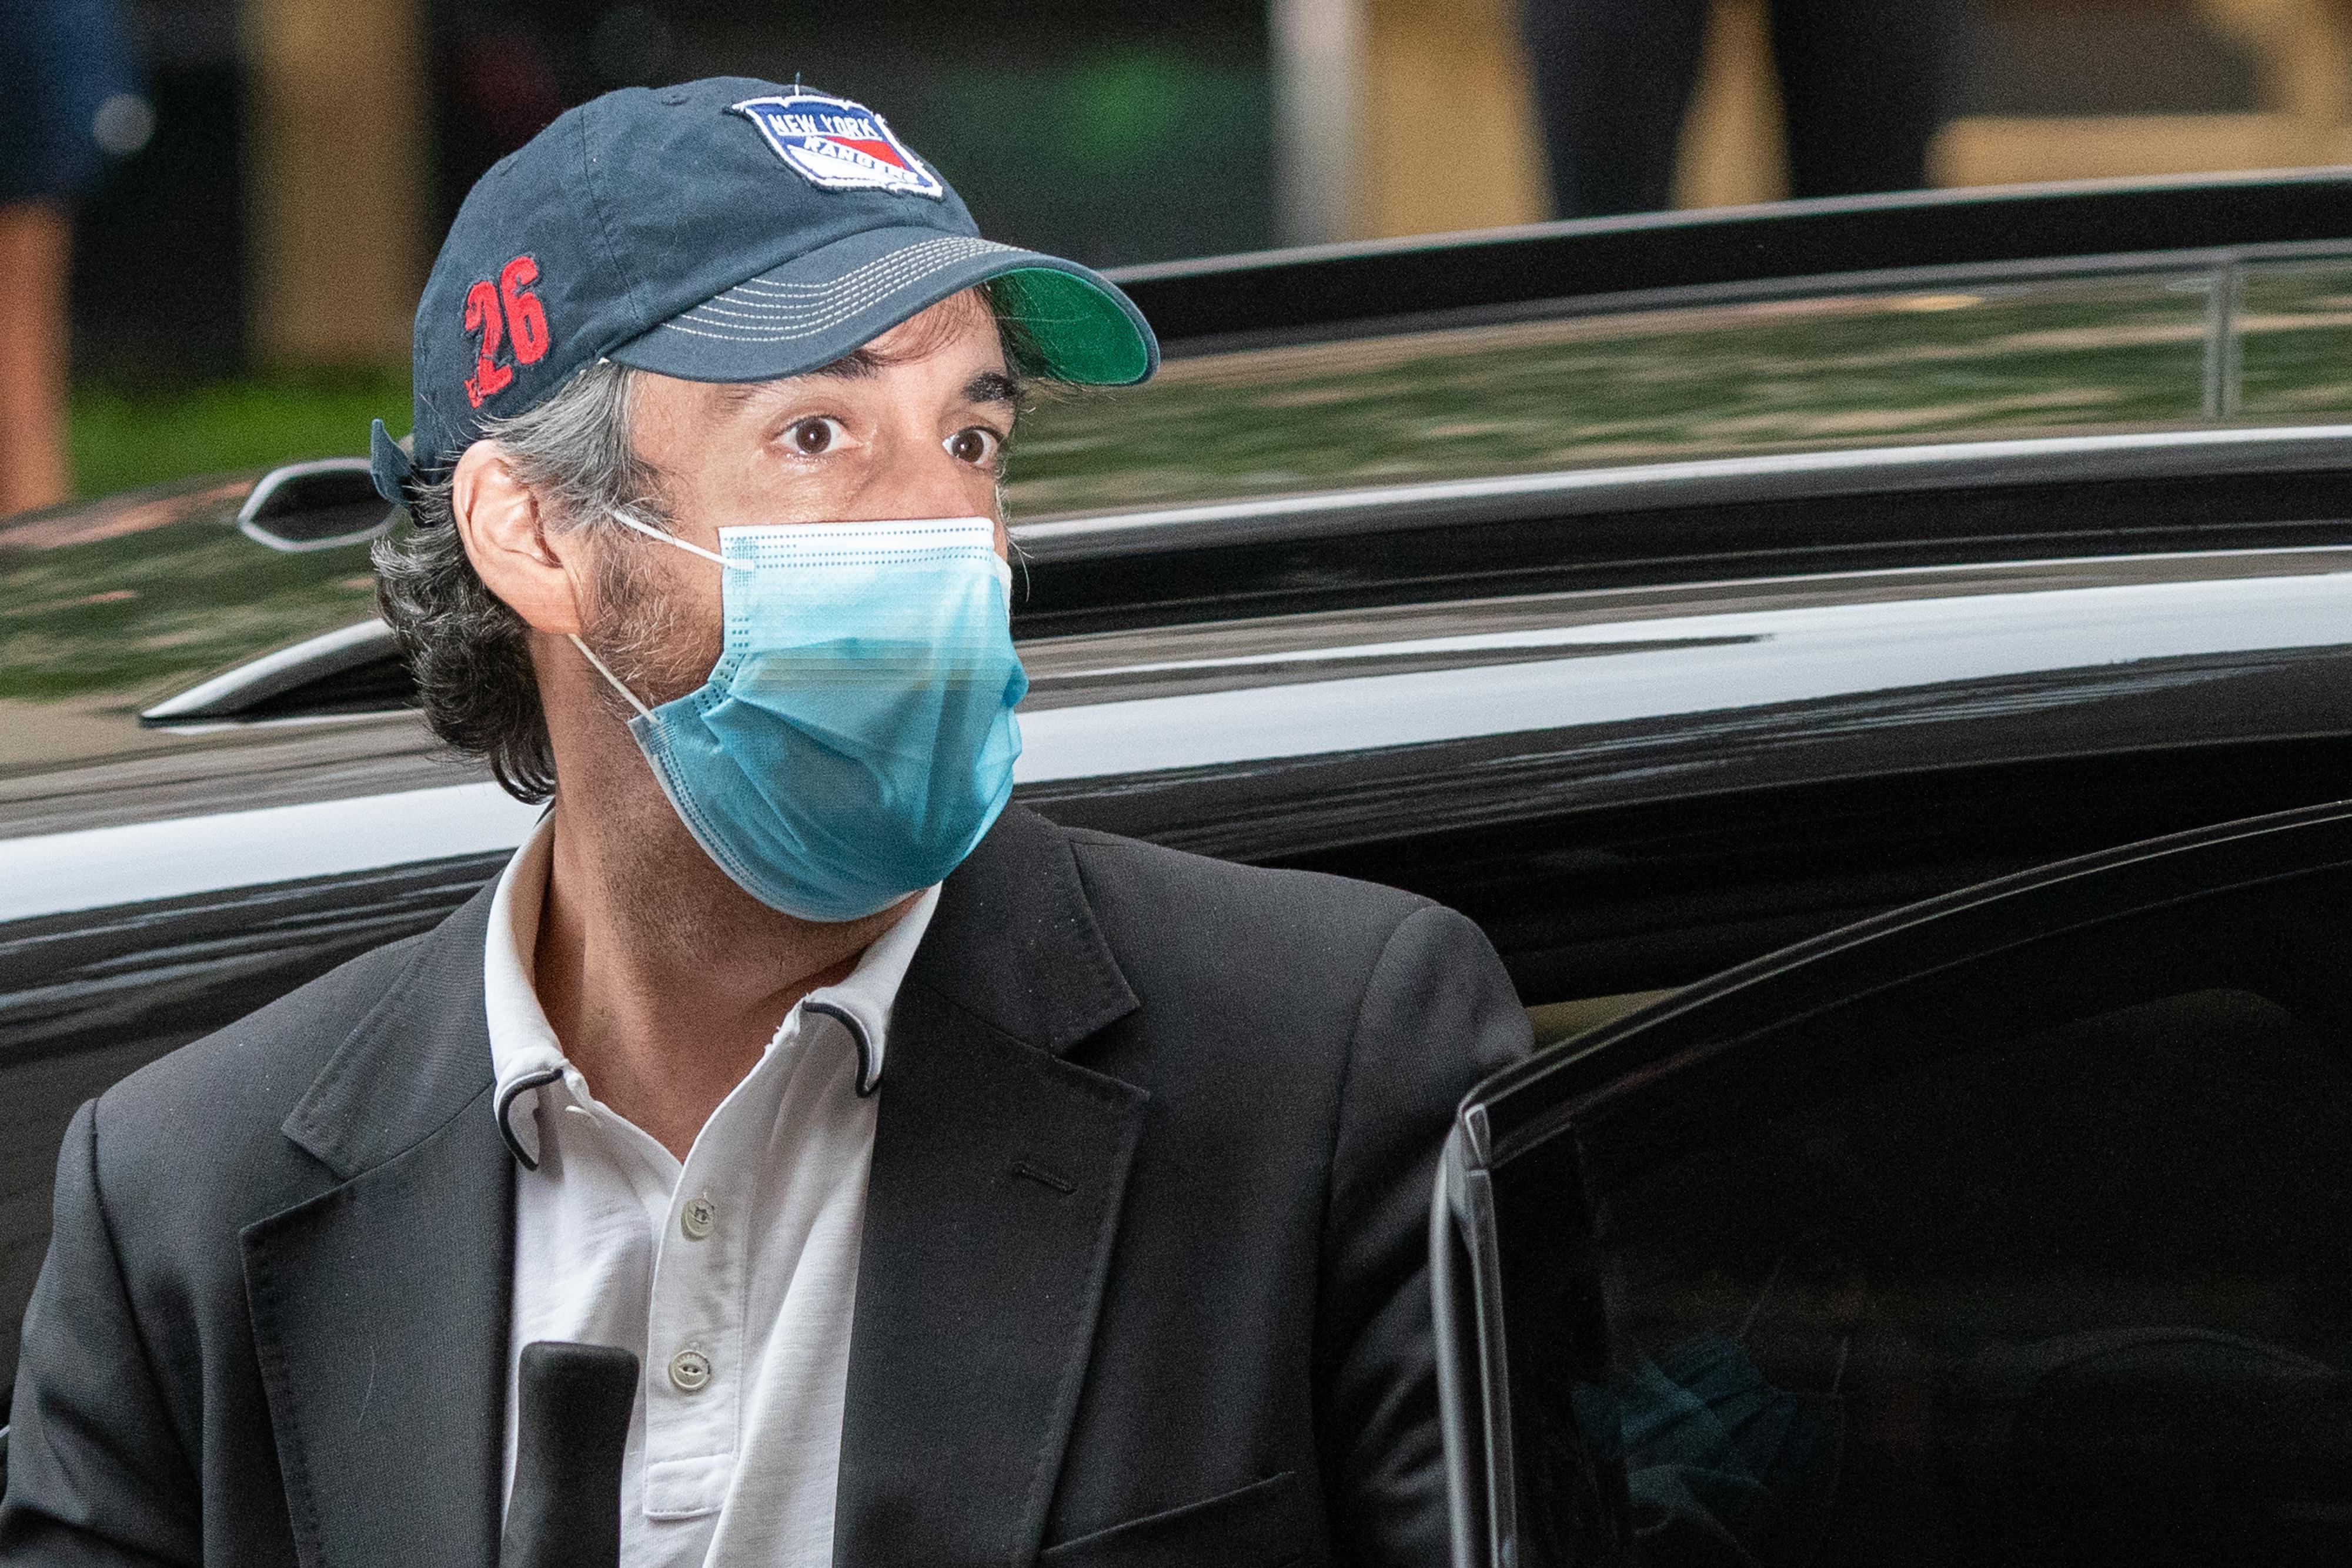 Michael Cohen, President Trump's former attorney arrives at his Park Avenue home after being released from federal prison on July 24, 2020 in New York City. 